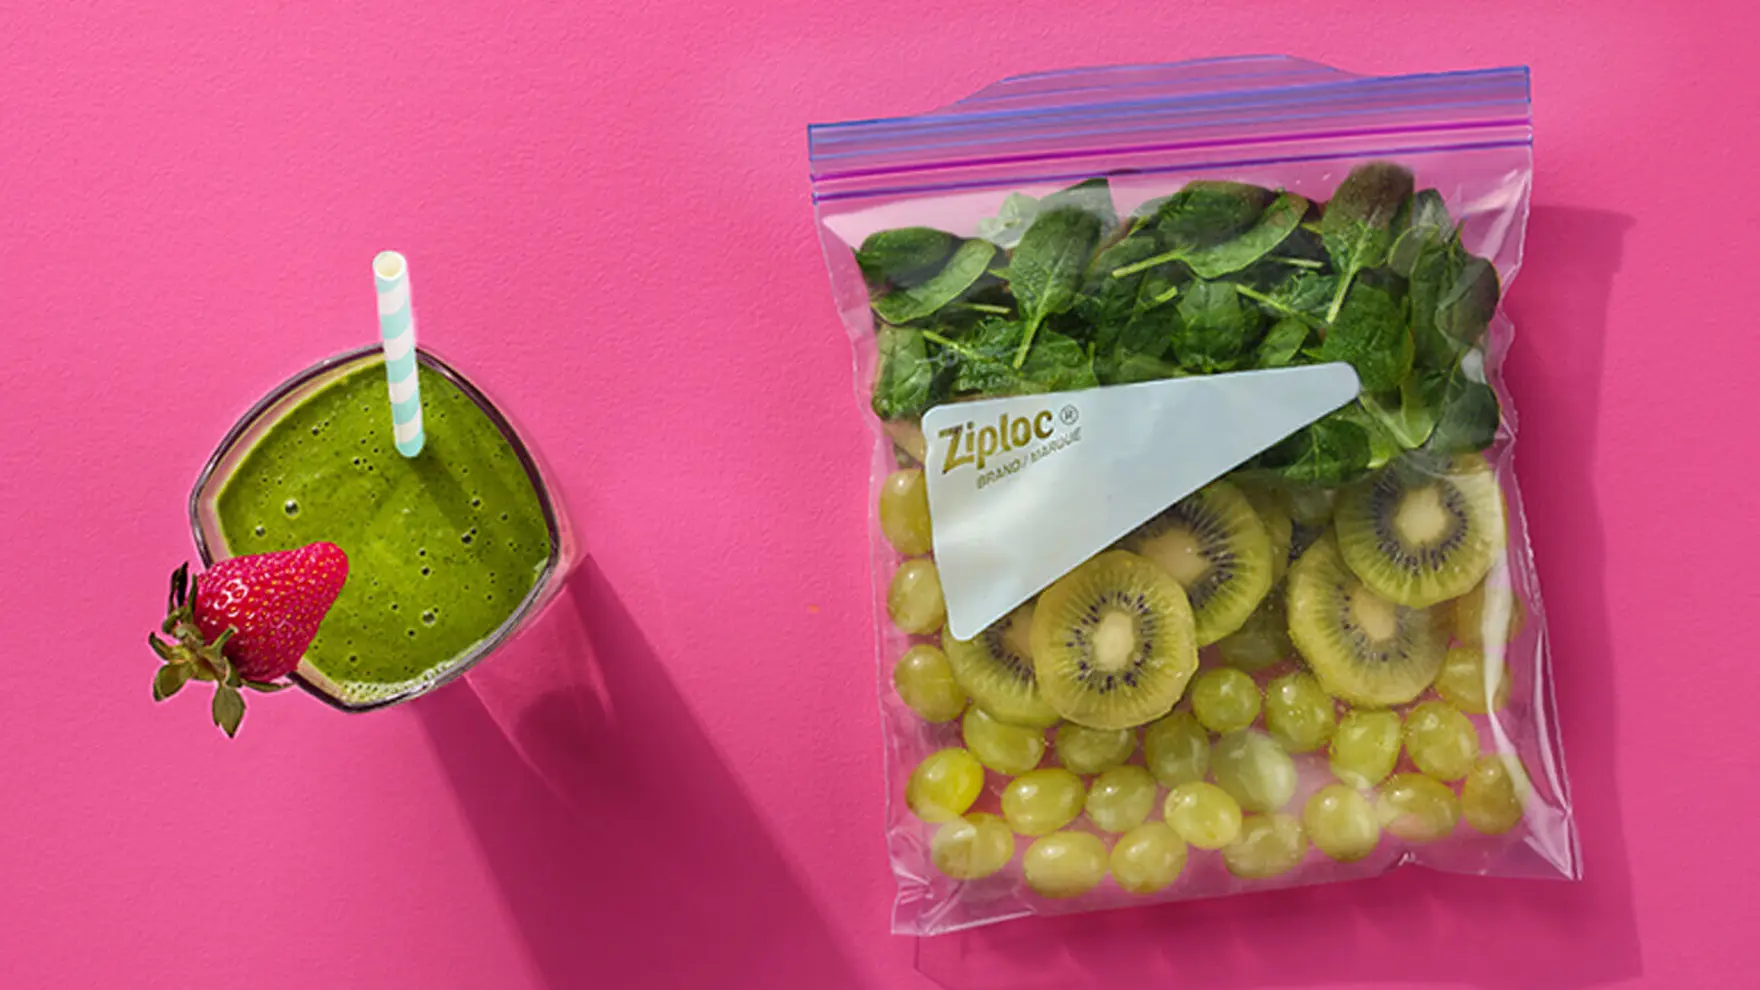 Ziploc bag filled with spinach, kiwi, and green grapes